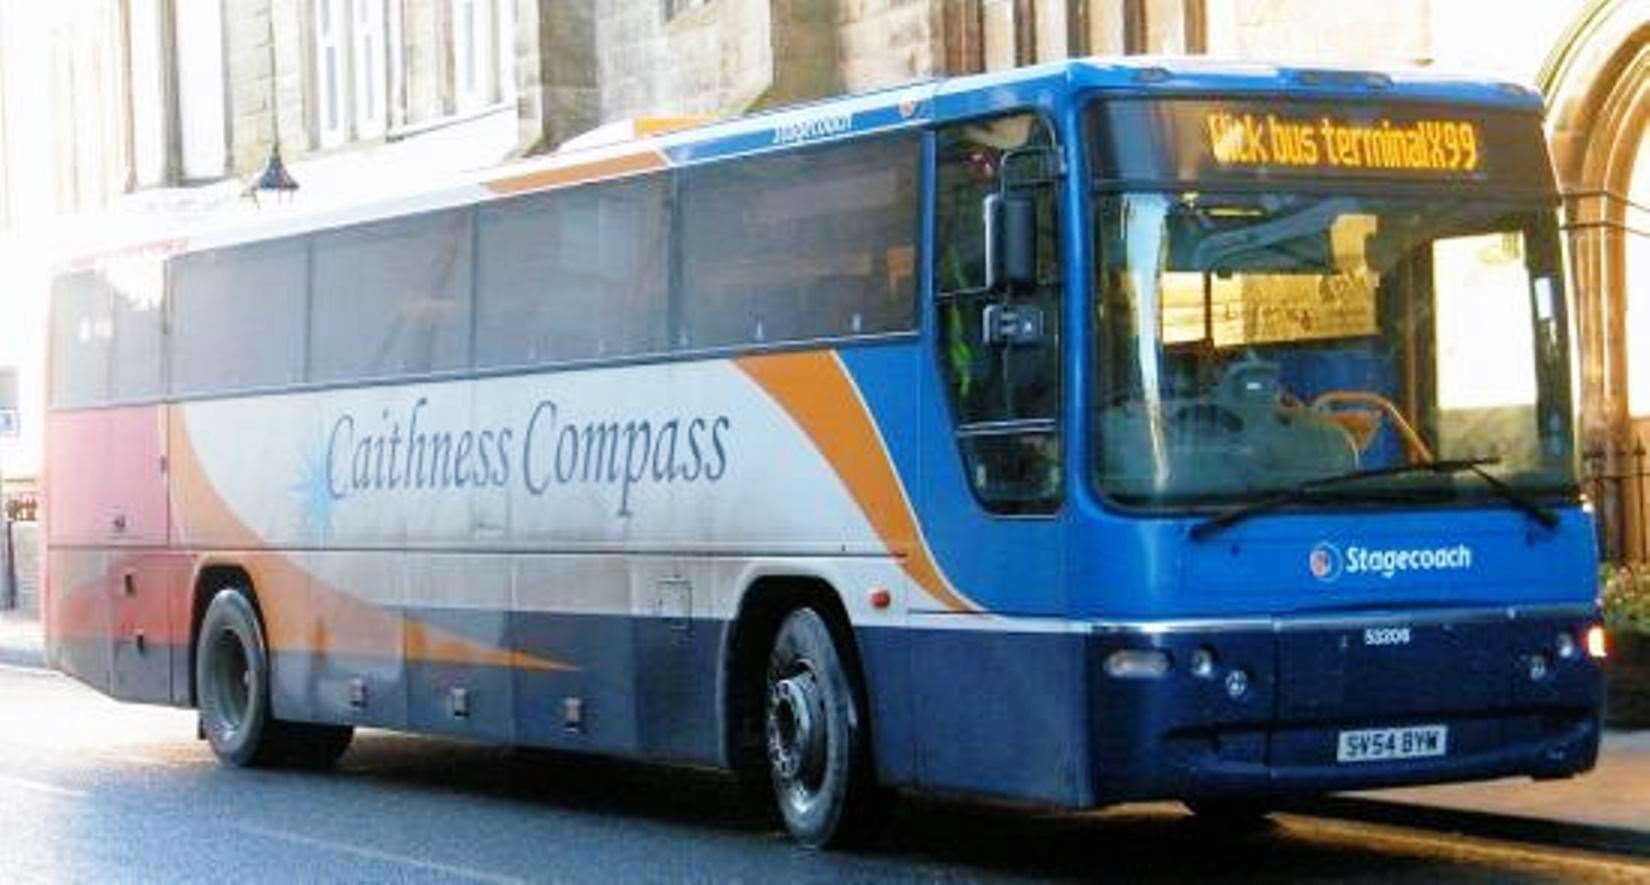 Stagecoach bus in Caithness.